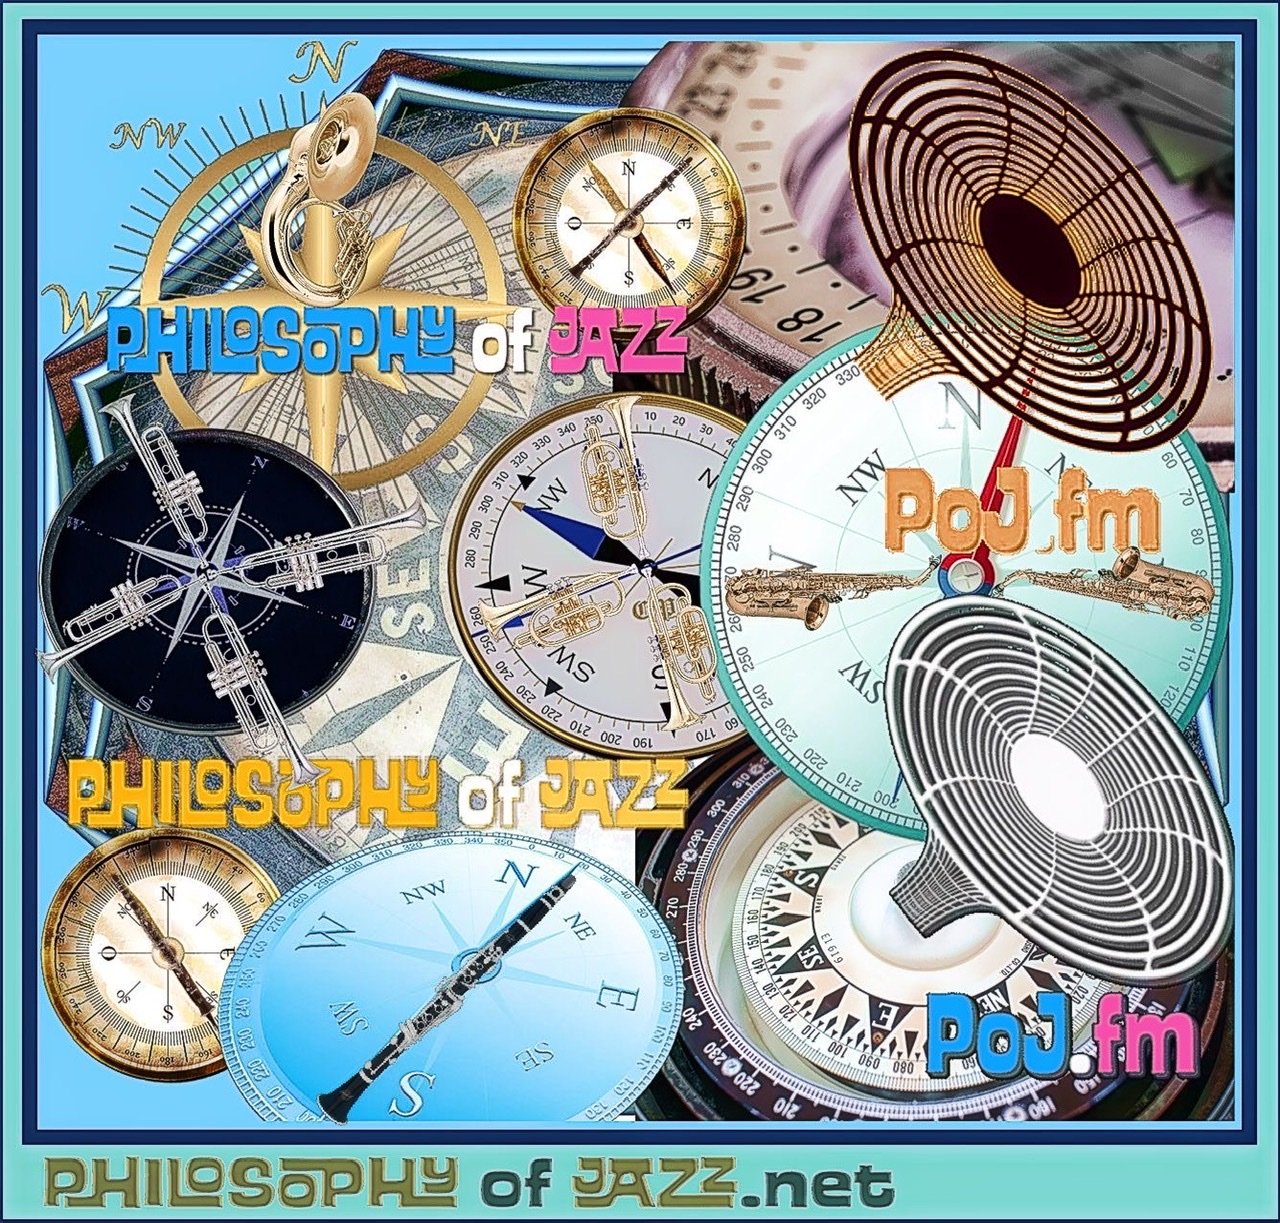 A composite of many different magnetic compasses with musical instruments on them and PoJ.fm logos.